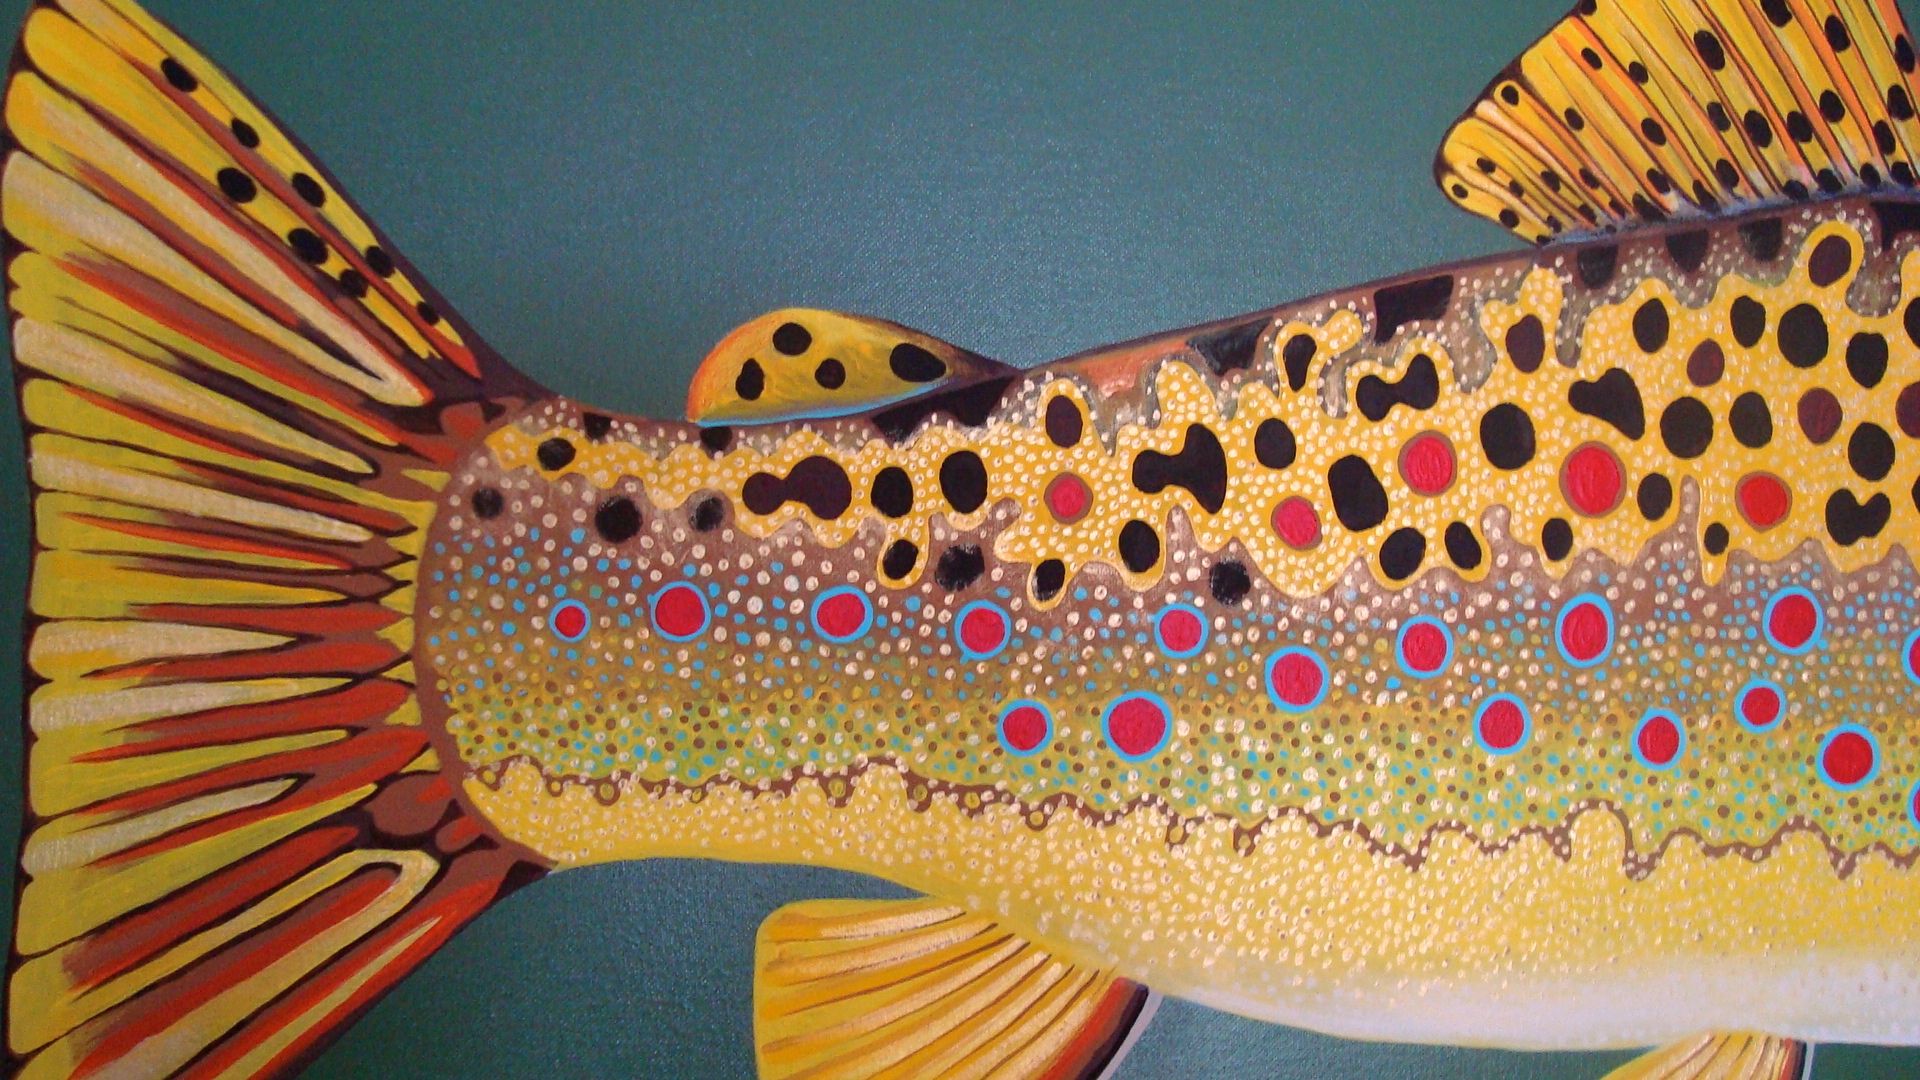 Rainbow Trout Wallpapers